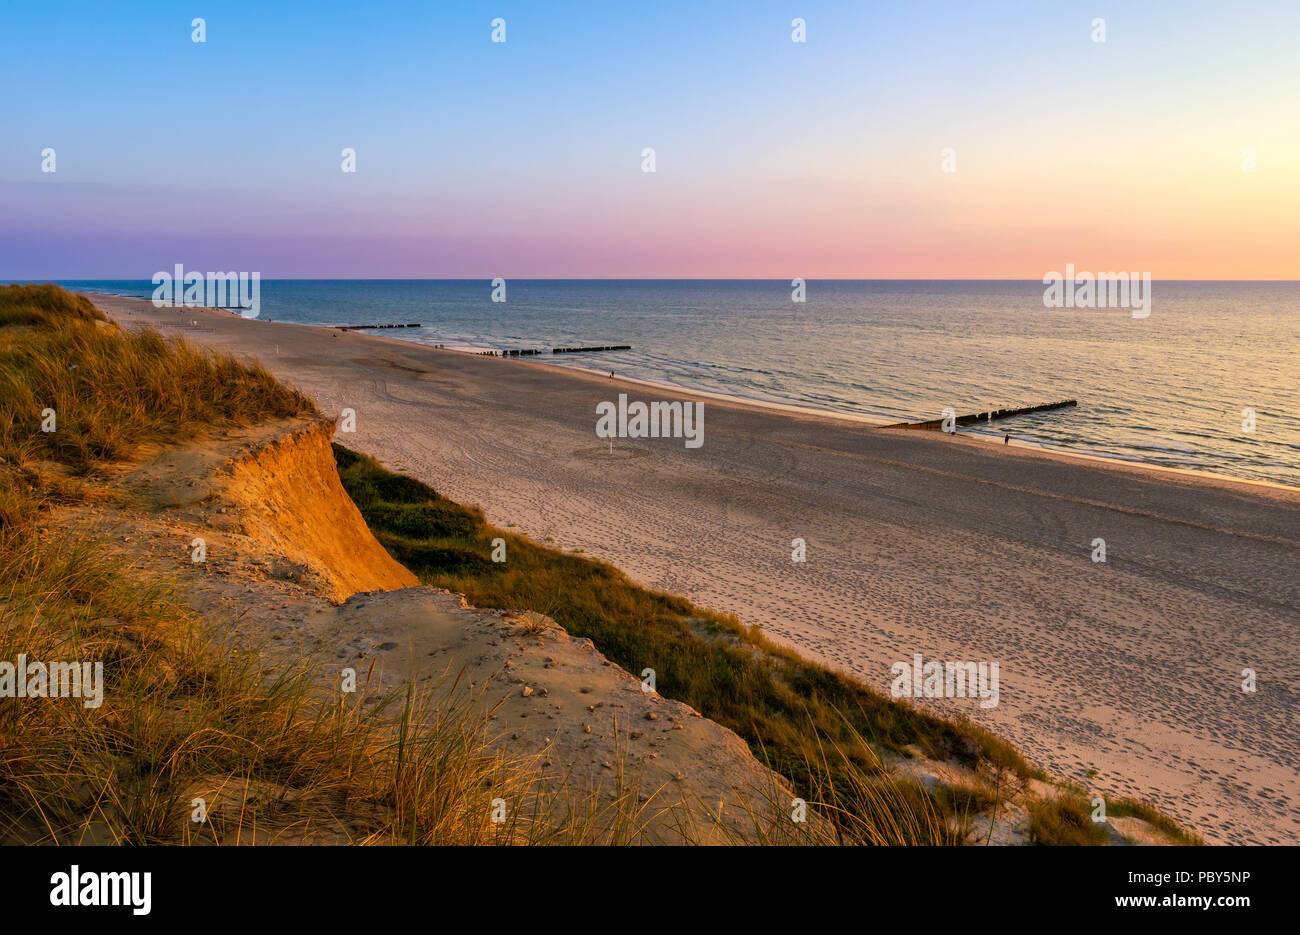 Sunset at Red Cliff (Rotes Kliff) - Sylt, Germany Stock Photo